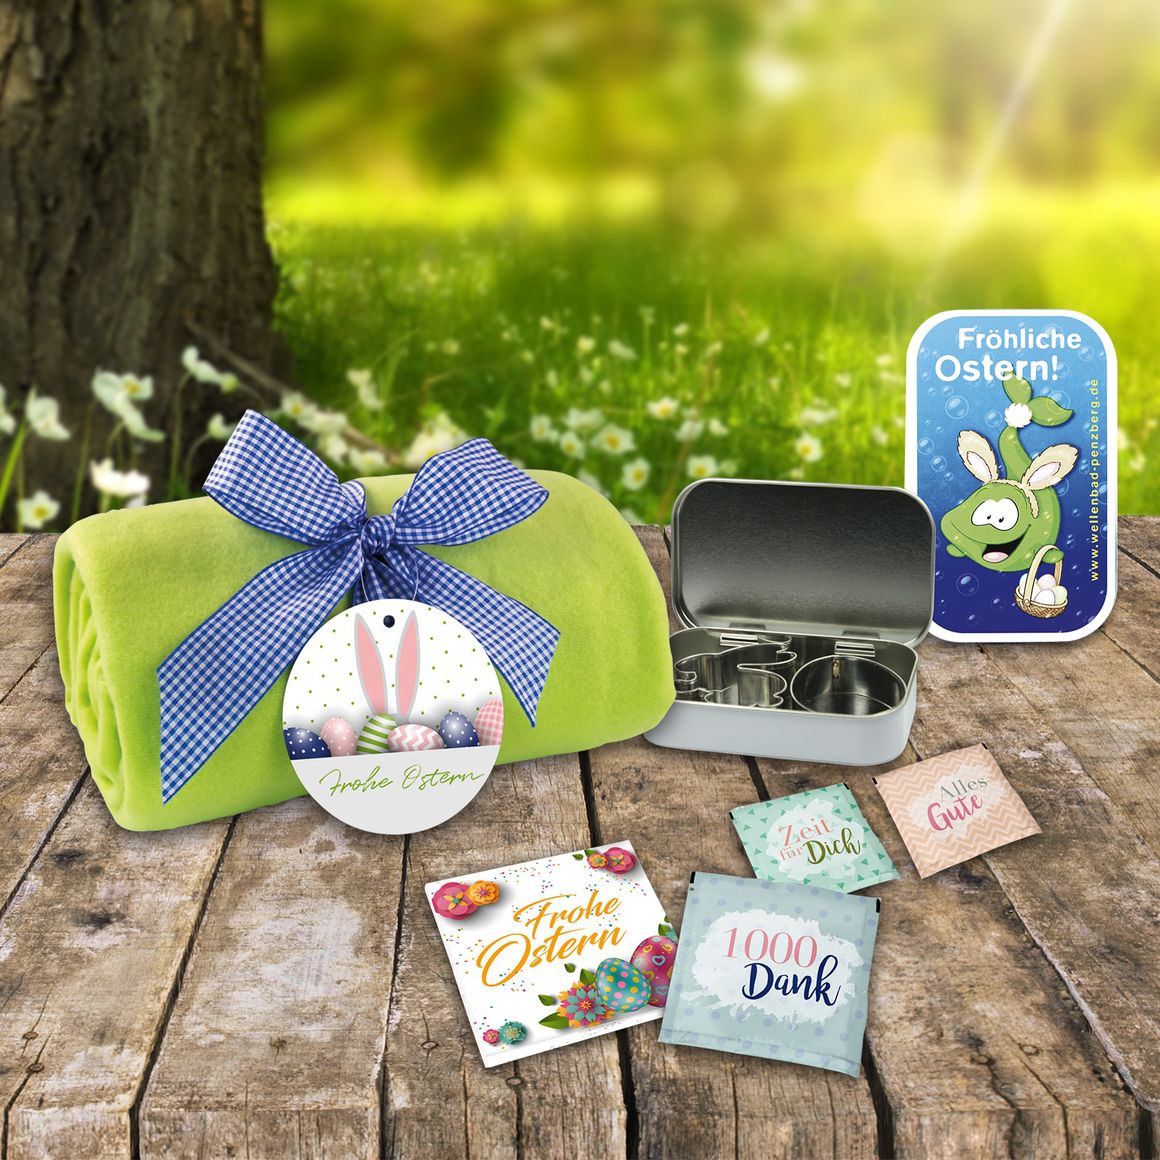 Practical and everyday promotional items for Easter